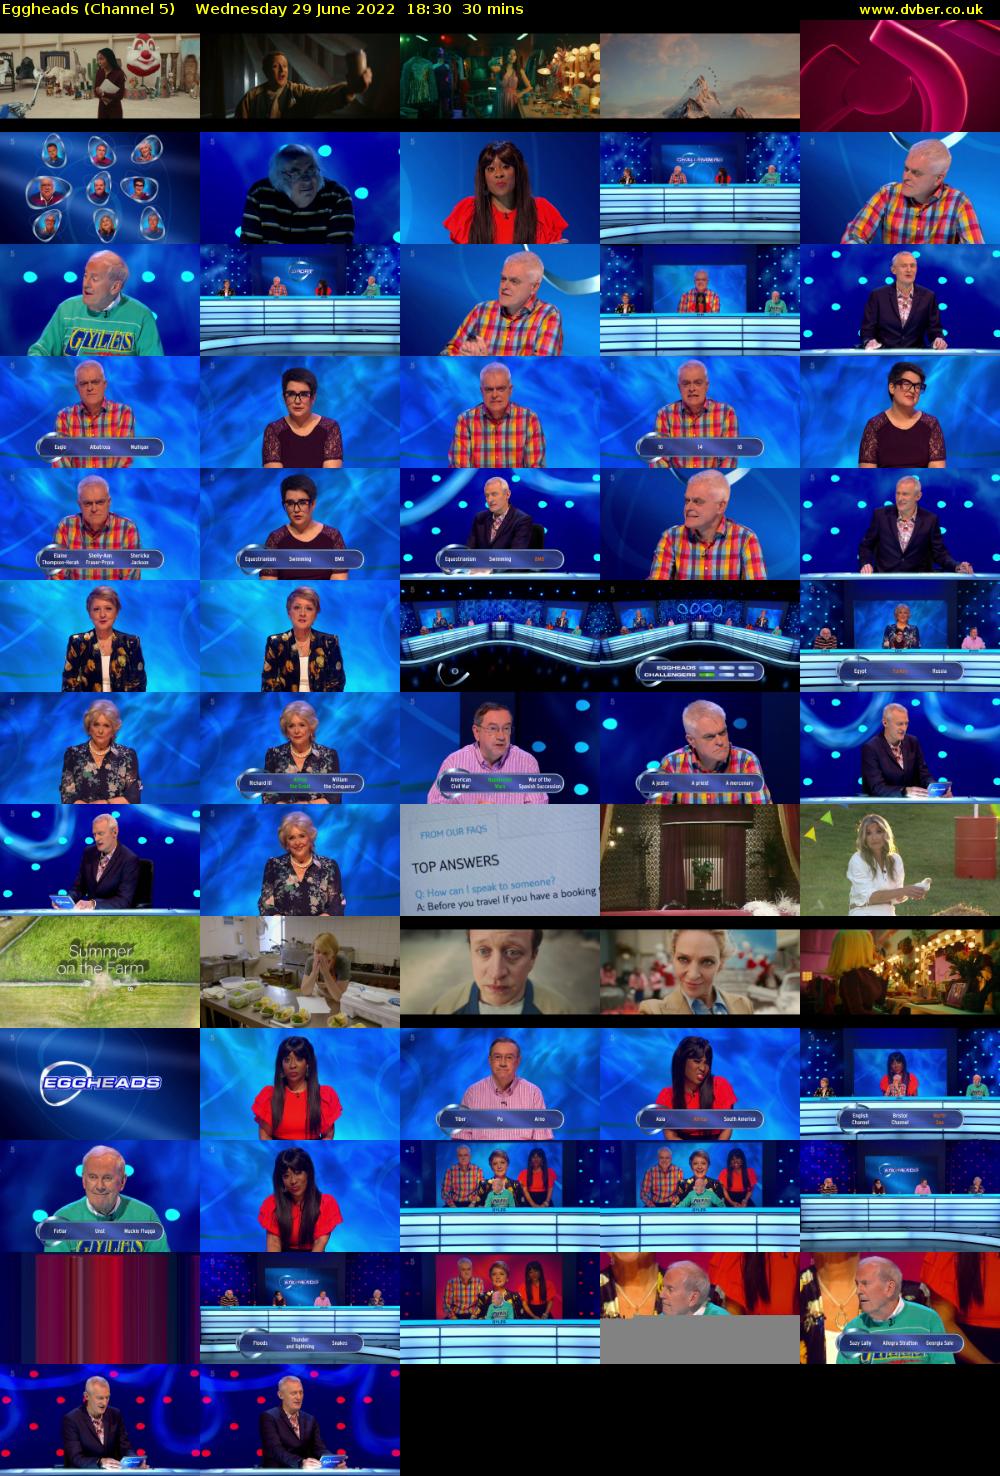 Eggheads (Channel 5) Wednesday 29 June 2022 18:30 - 19:00